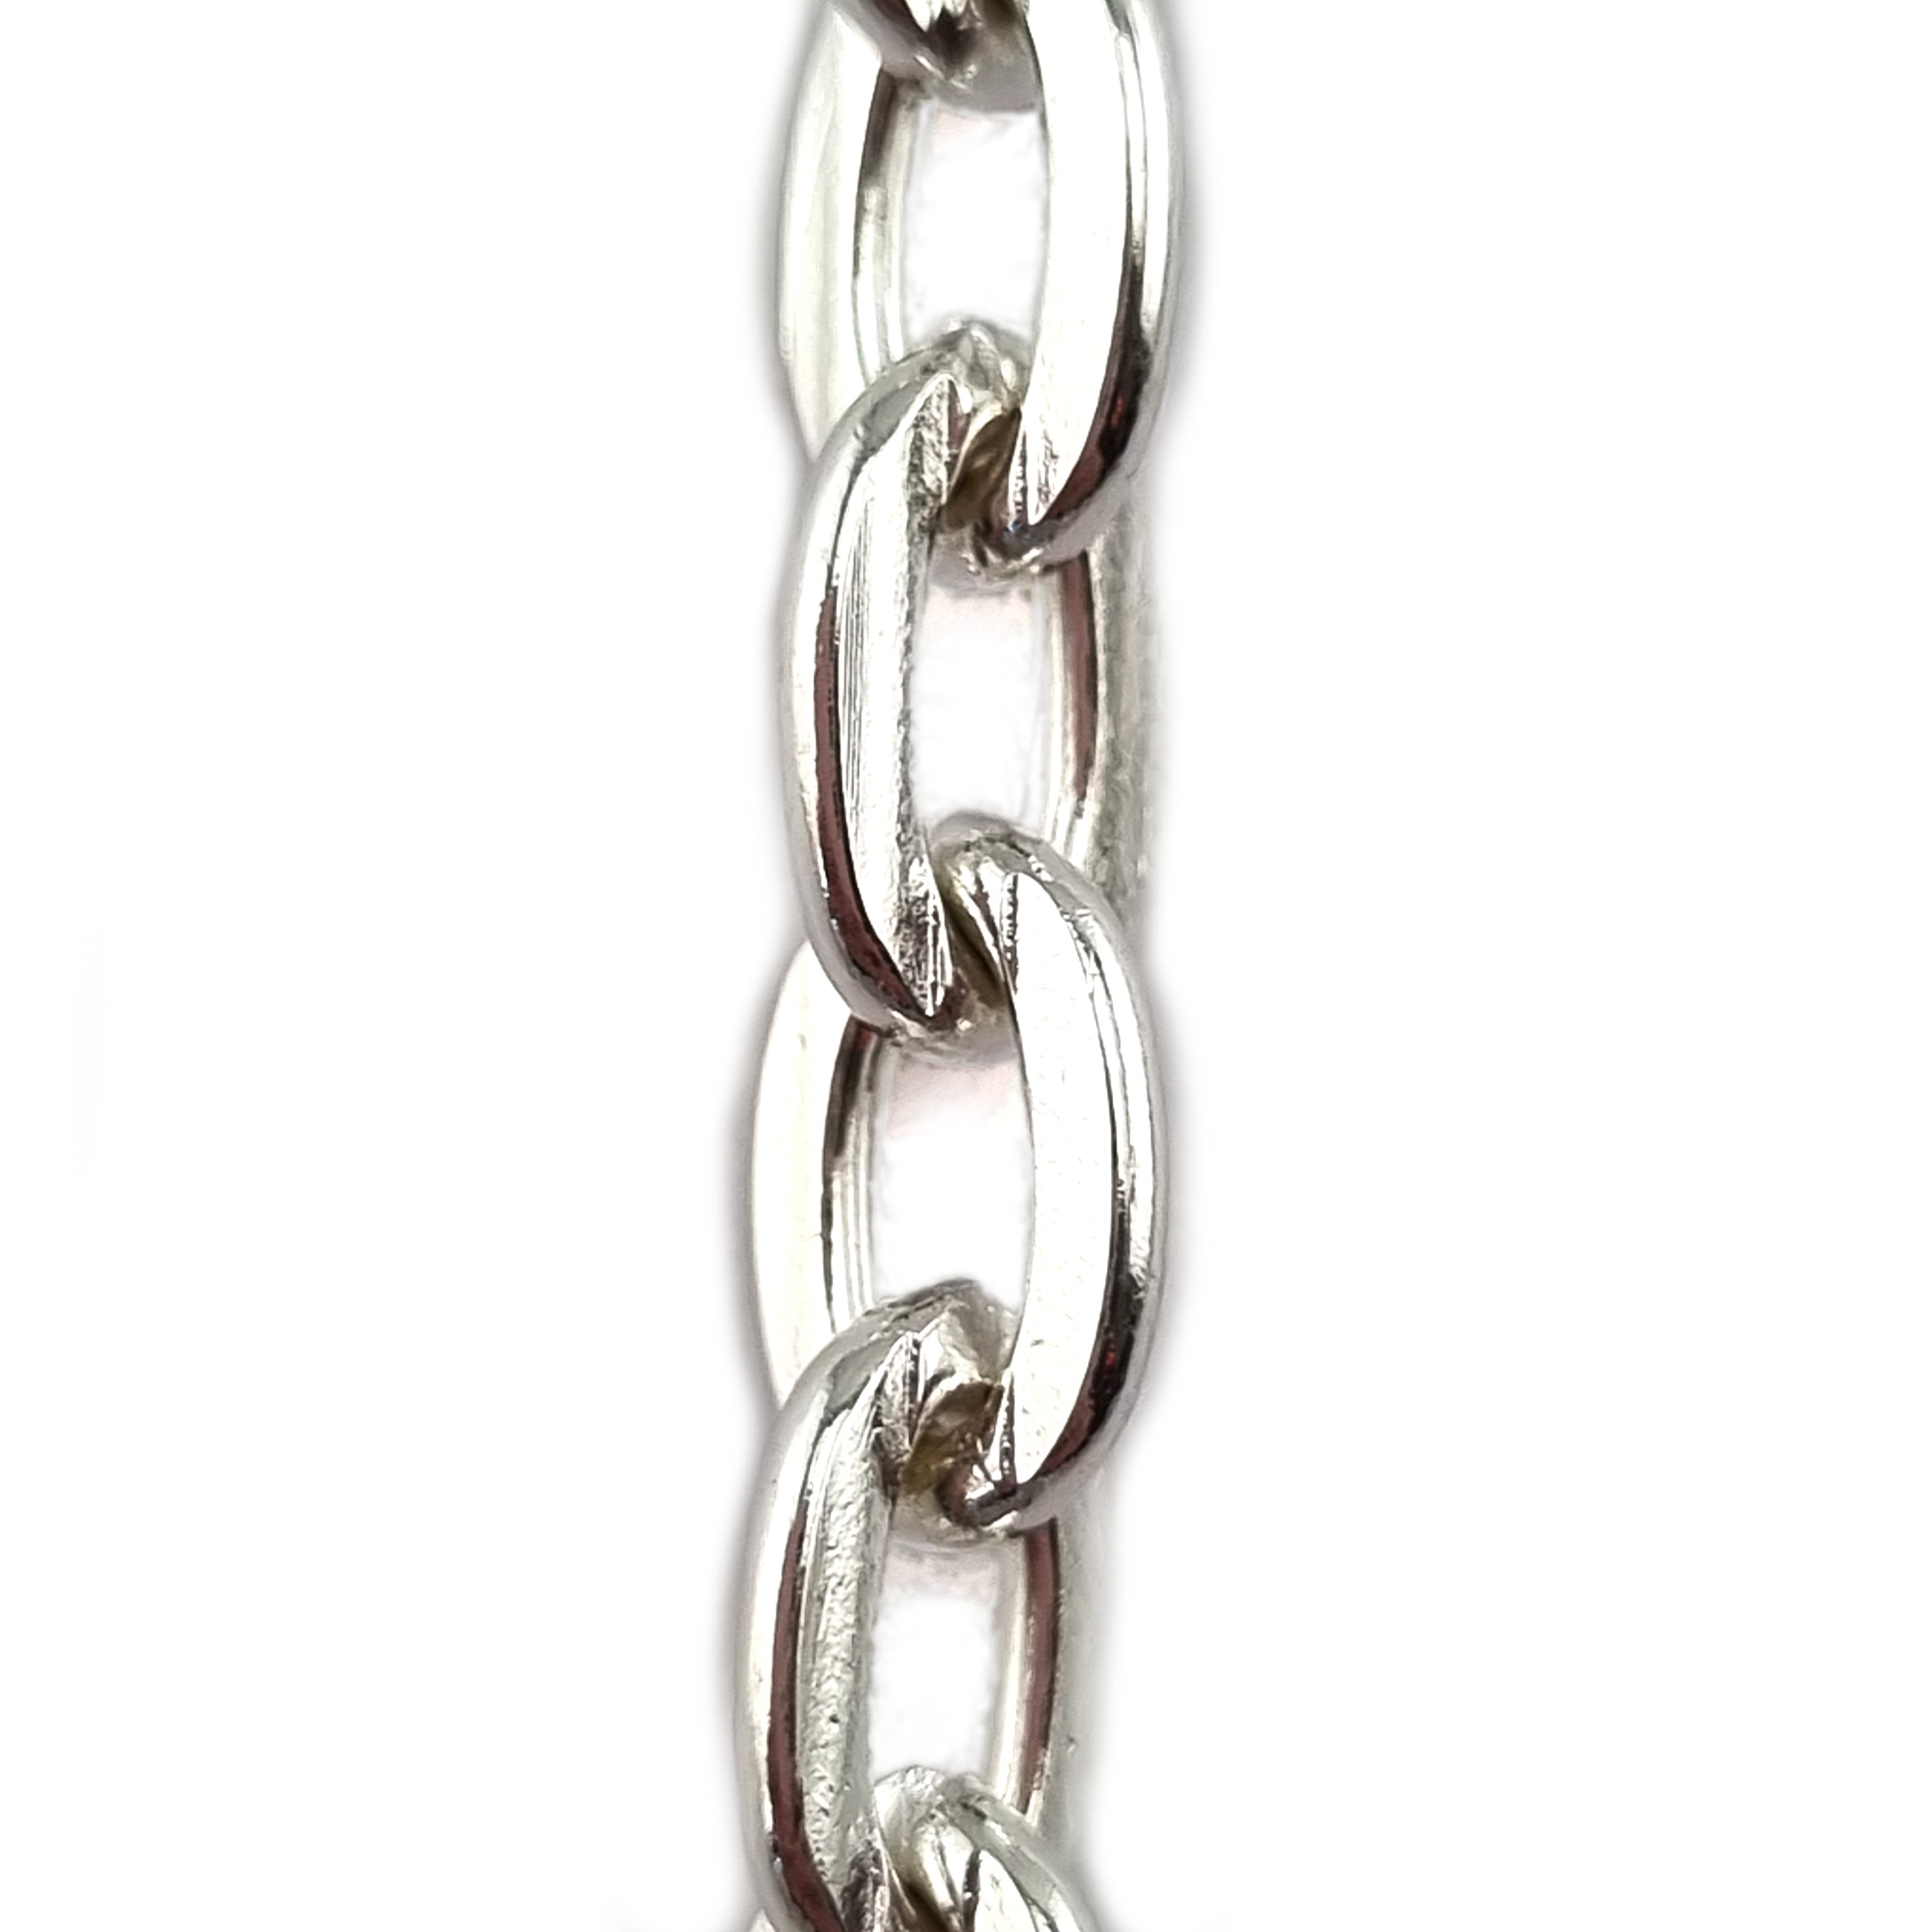 Hammered Trace Chain in a Silver Plated Finish. Size: 0.05mm, T5H. Jewellery Chain, Australia wide shipping. Shop chain.com.au